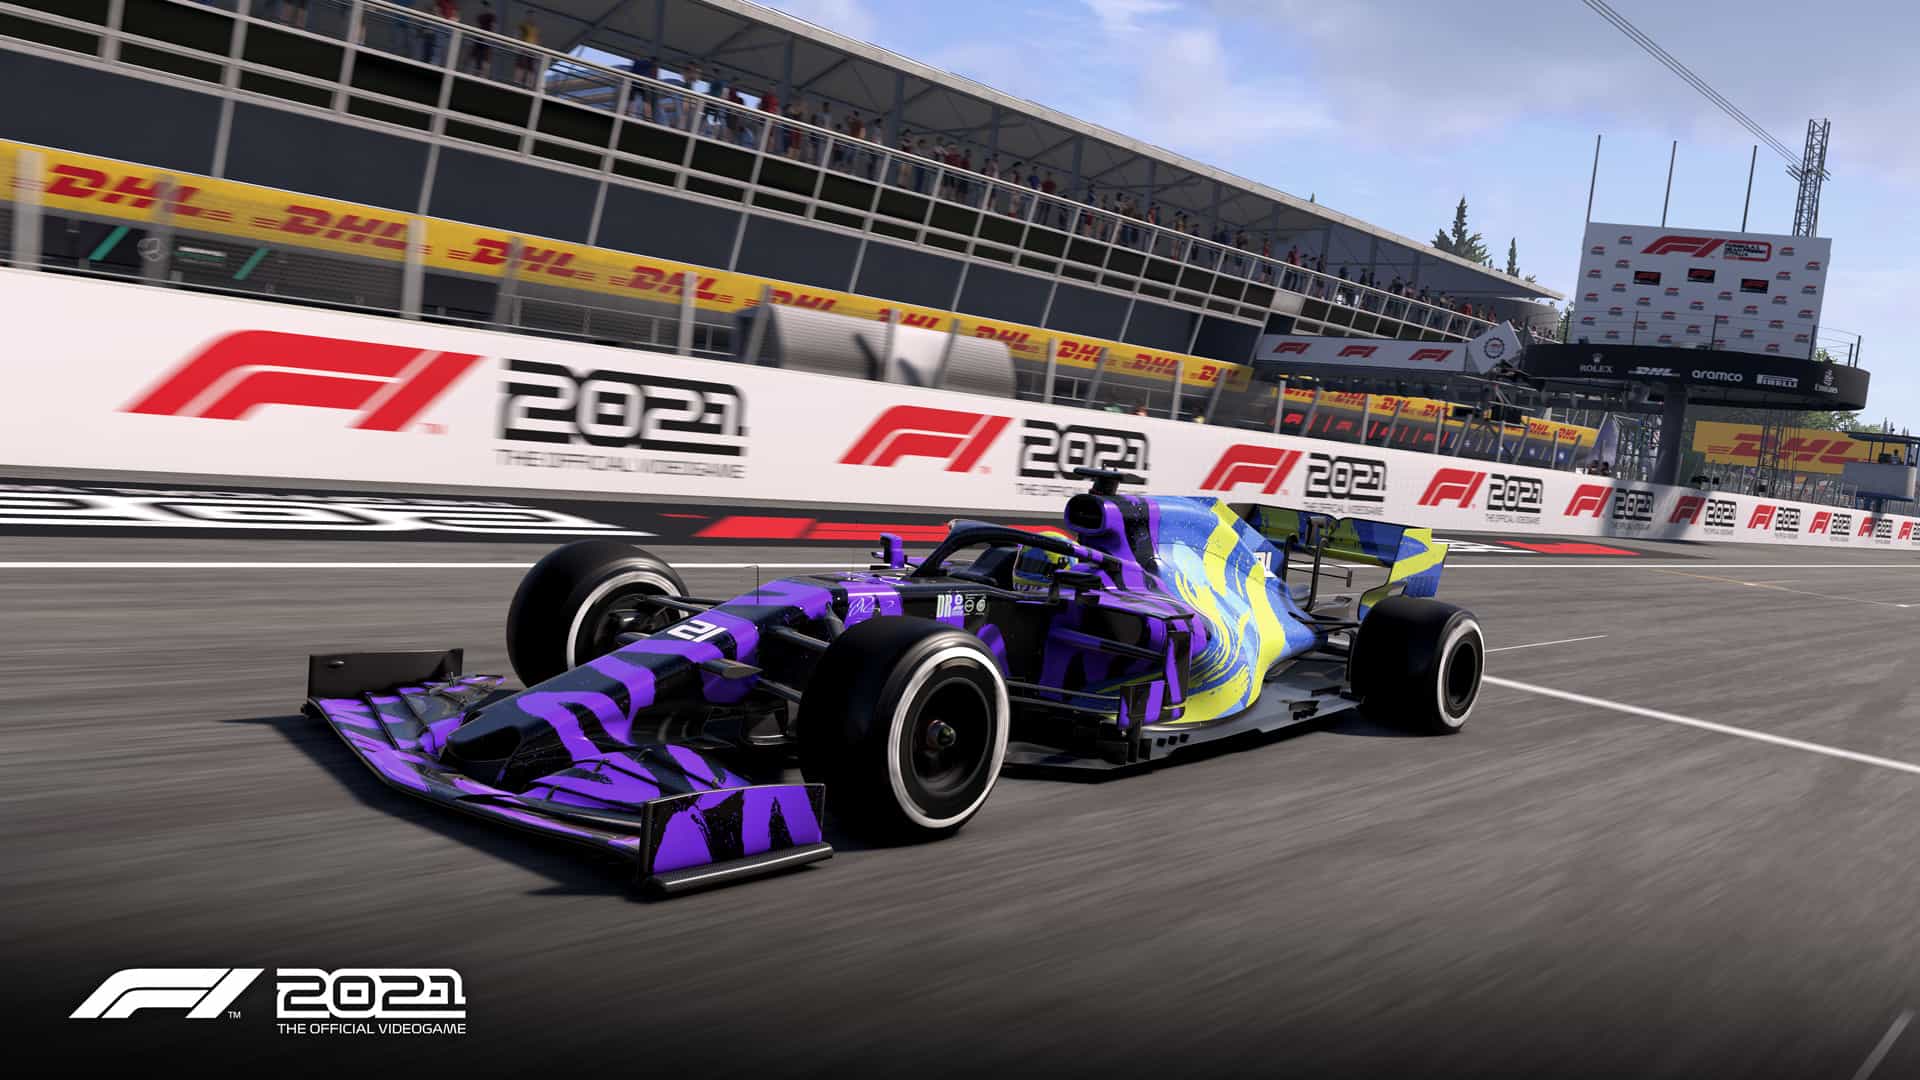 Daniel Ricciardo and George Russell have designed F1 2021 game liveries